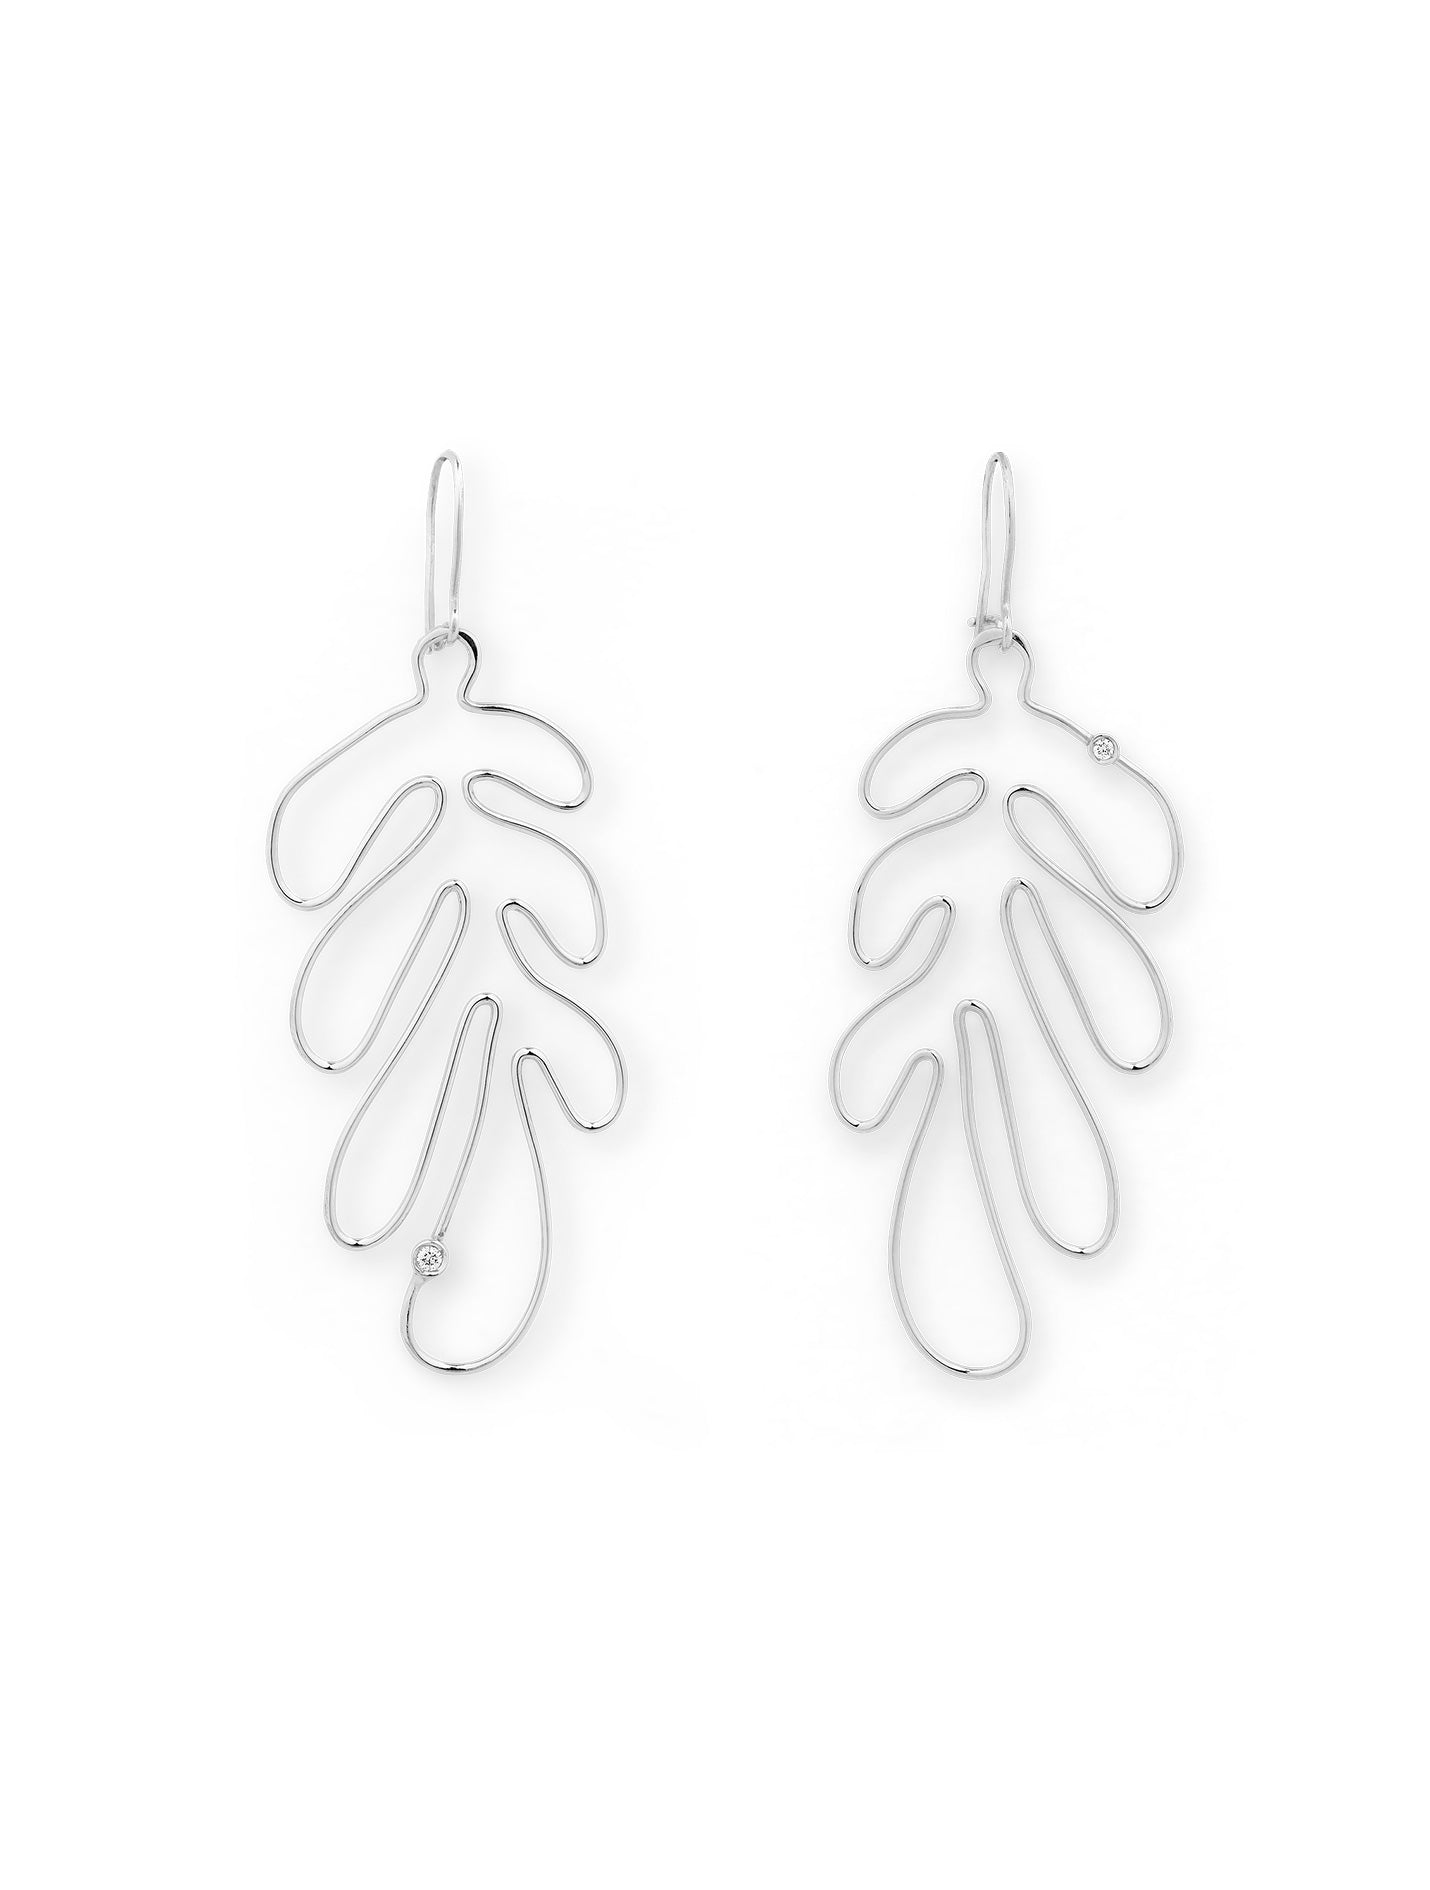 Matisse - earring and pendant in one